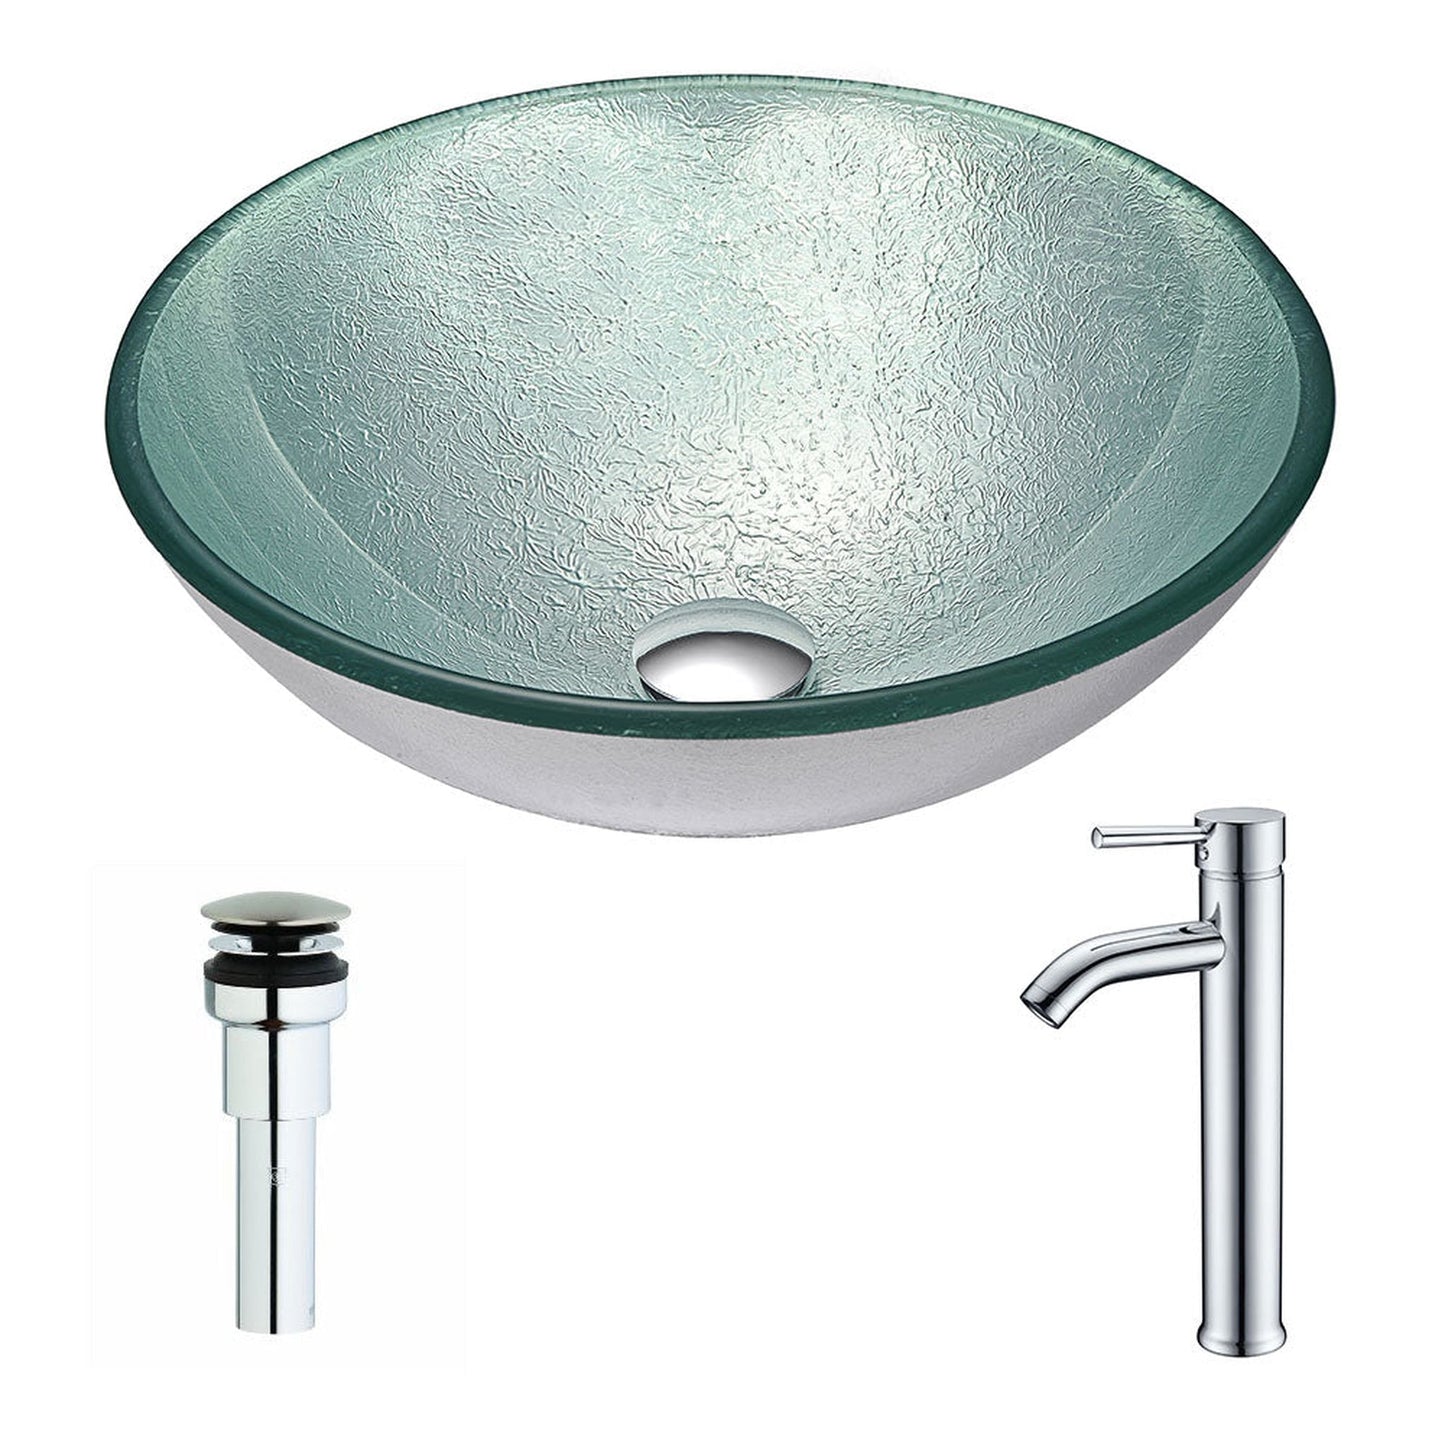 ANZZI Spirito Series 17" x 17" Round Churning Silver Deco-Glass Vessel Sink With Chrome Pop-Up Drain and Brushed Nickel Fann Faucet